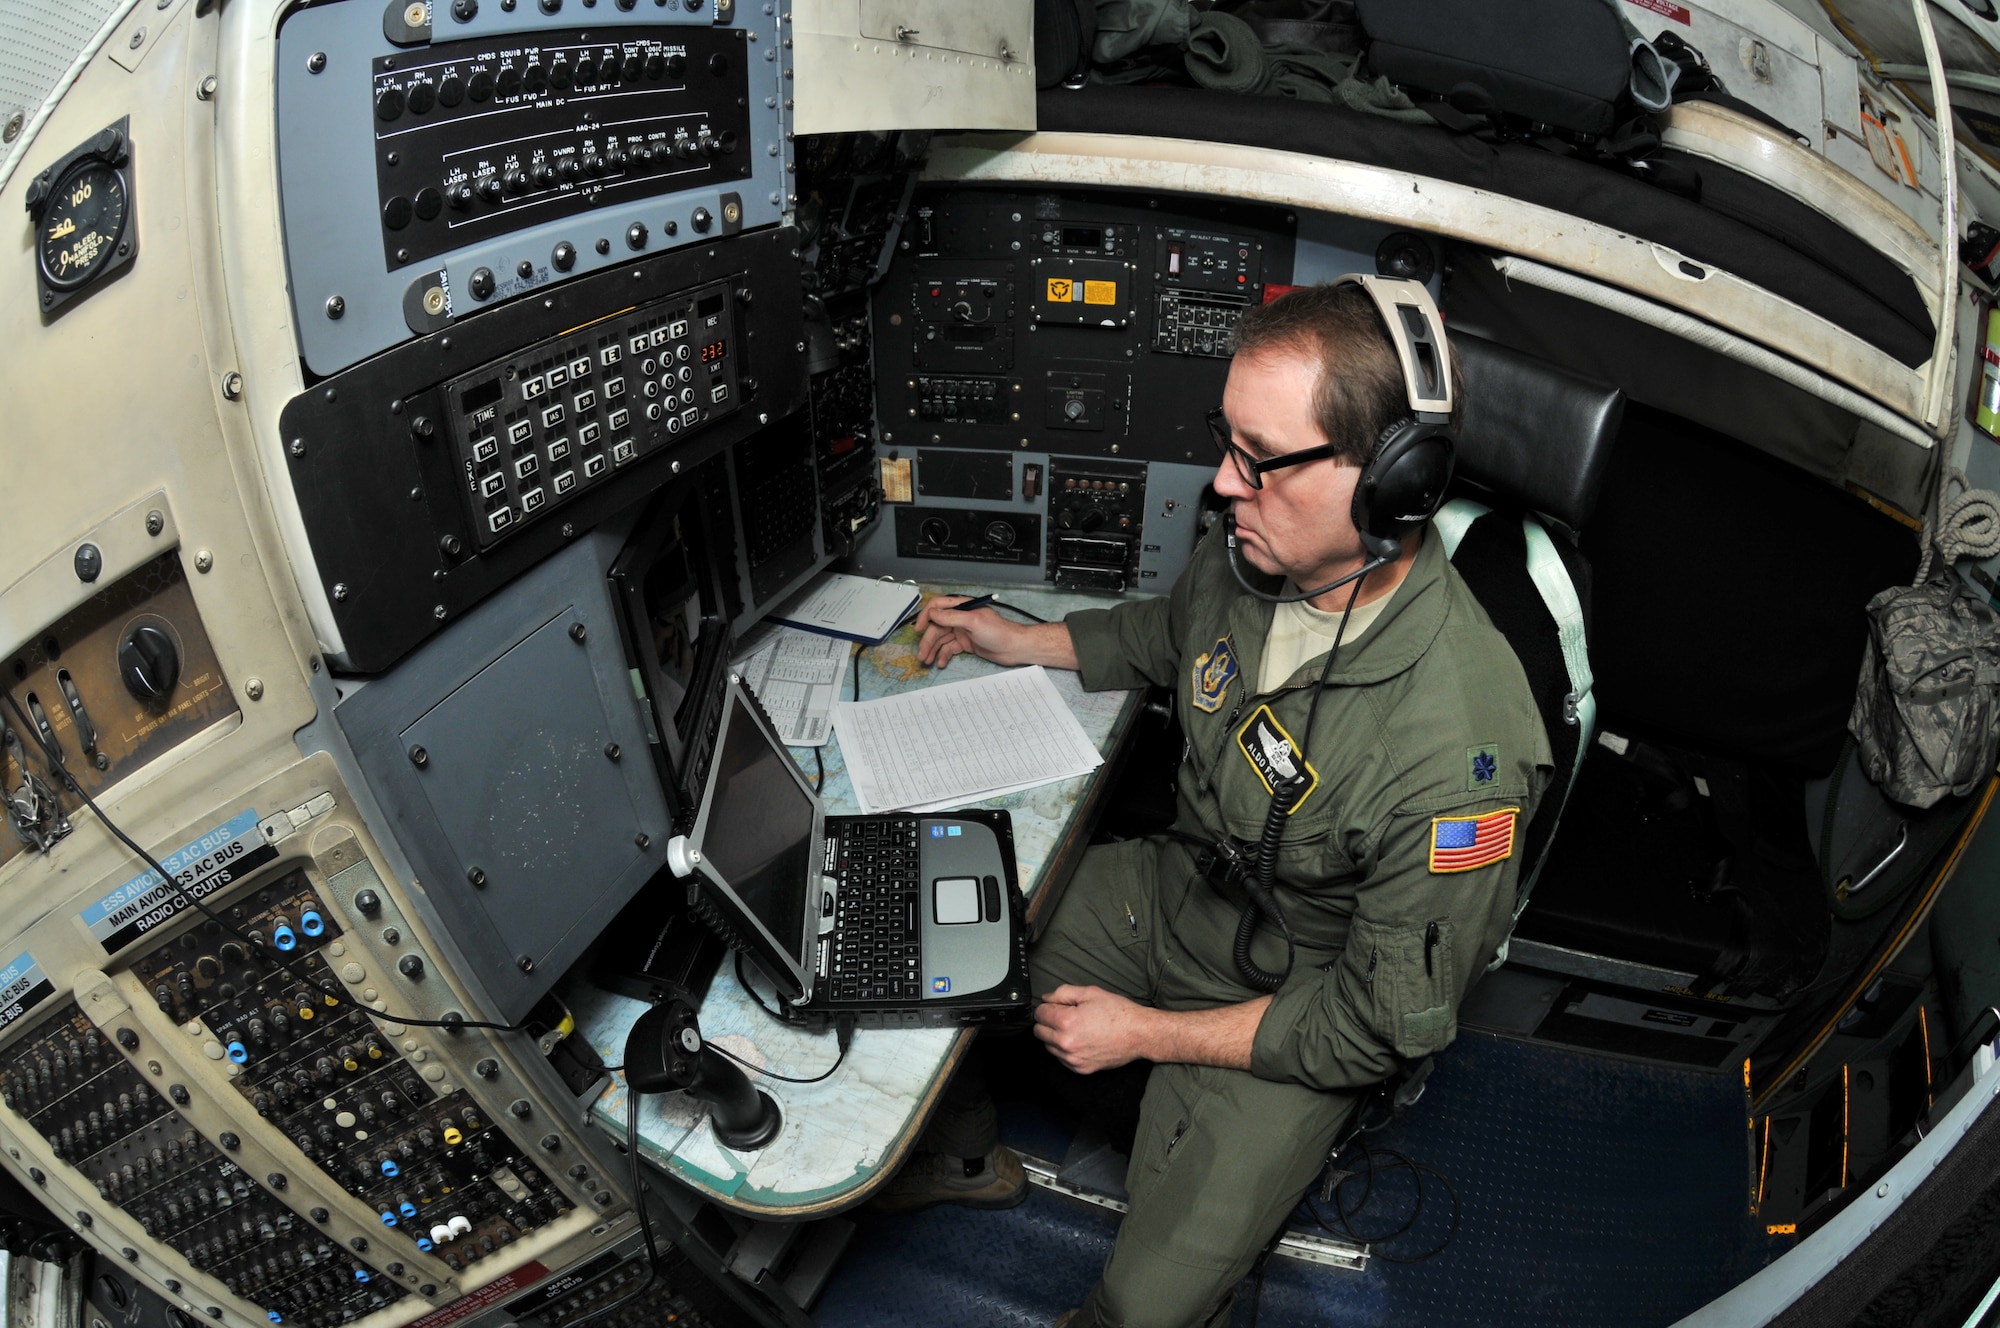 Lt. Col. Aldo Filoni, primary evaluator navigator with the 911th Operations Group, monitors the main aviation computer on a C-130 Hercules during an all-weather airdrop delivery system exercise sortie near Cadiz, Ohio, March 7, 2015. During an AWADS sortie, cargo is dropped from the aircraft in the middle of visibility reducing weather conditions. (U.S. Air Force photo by Senior Airman Marjorie A. Bowlden)